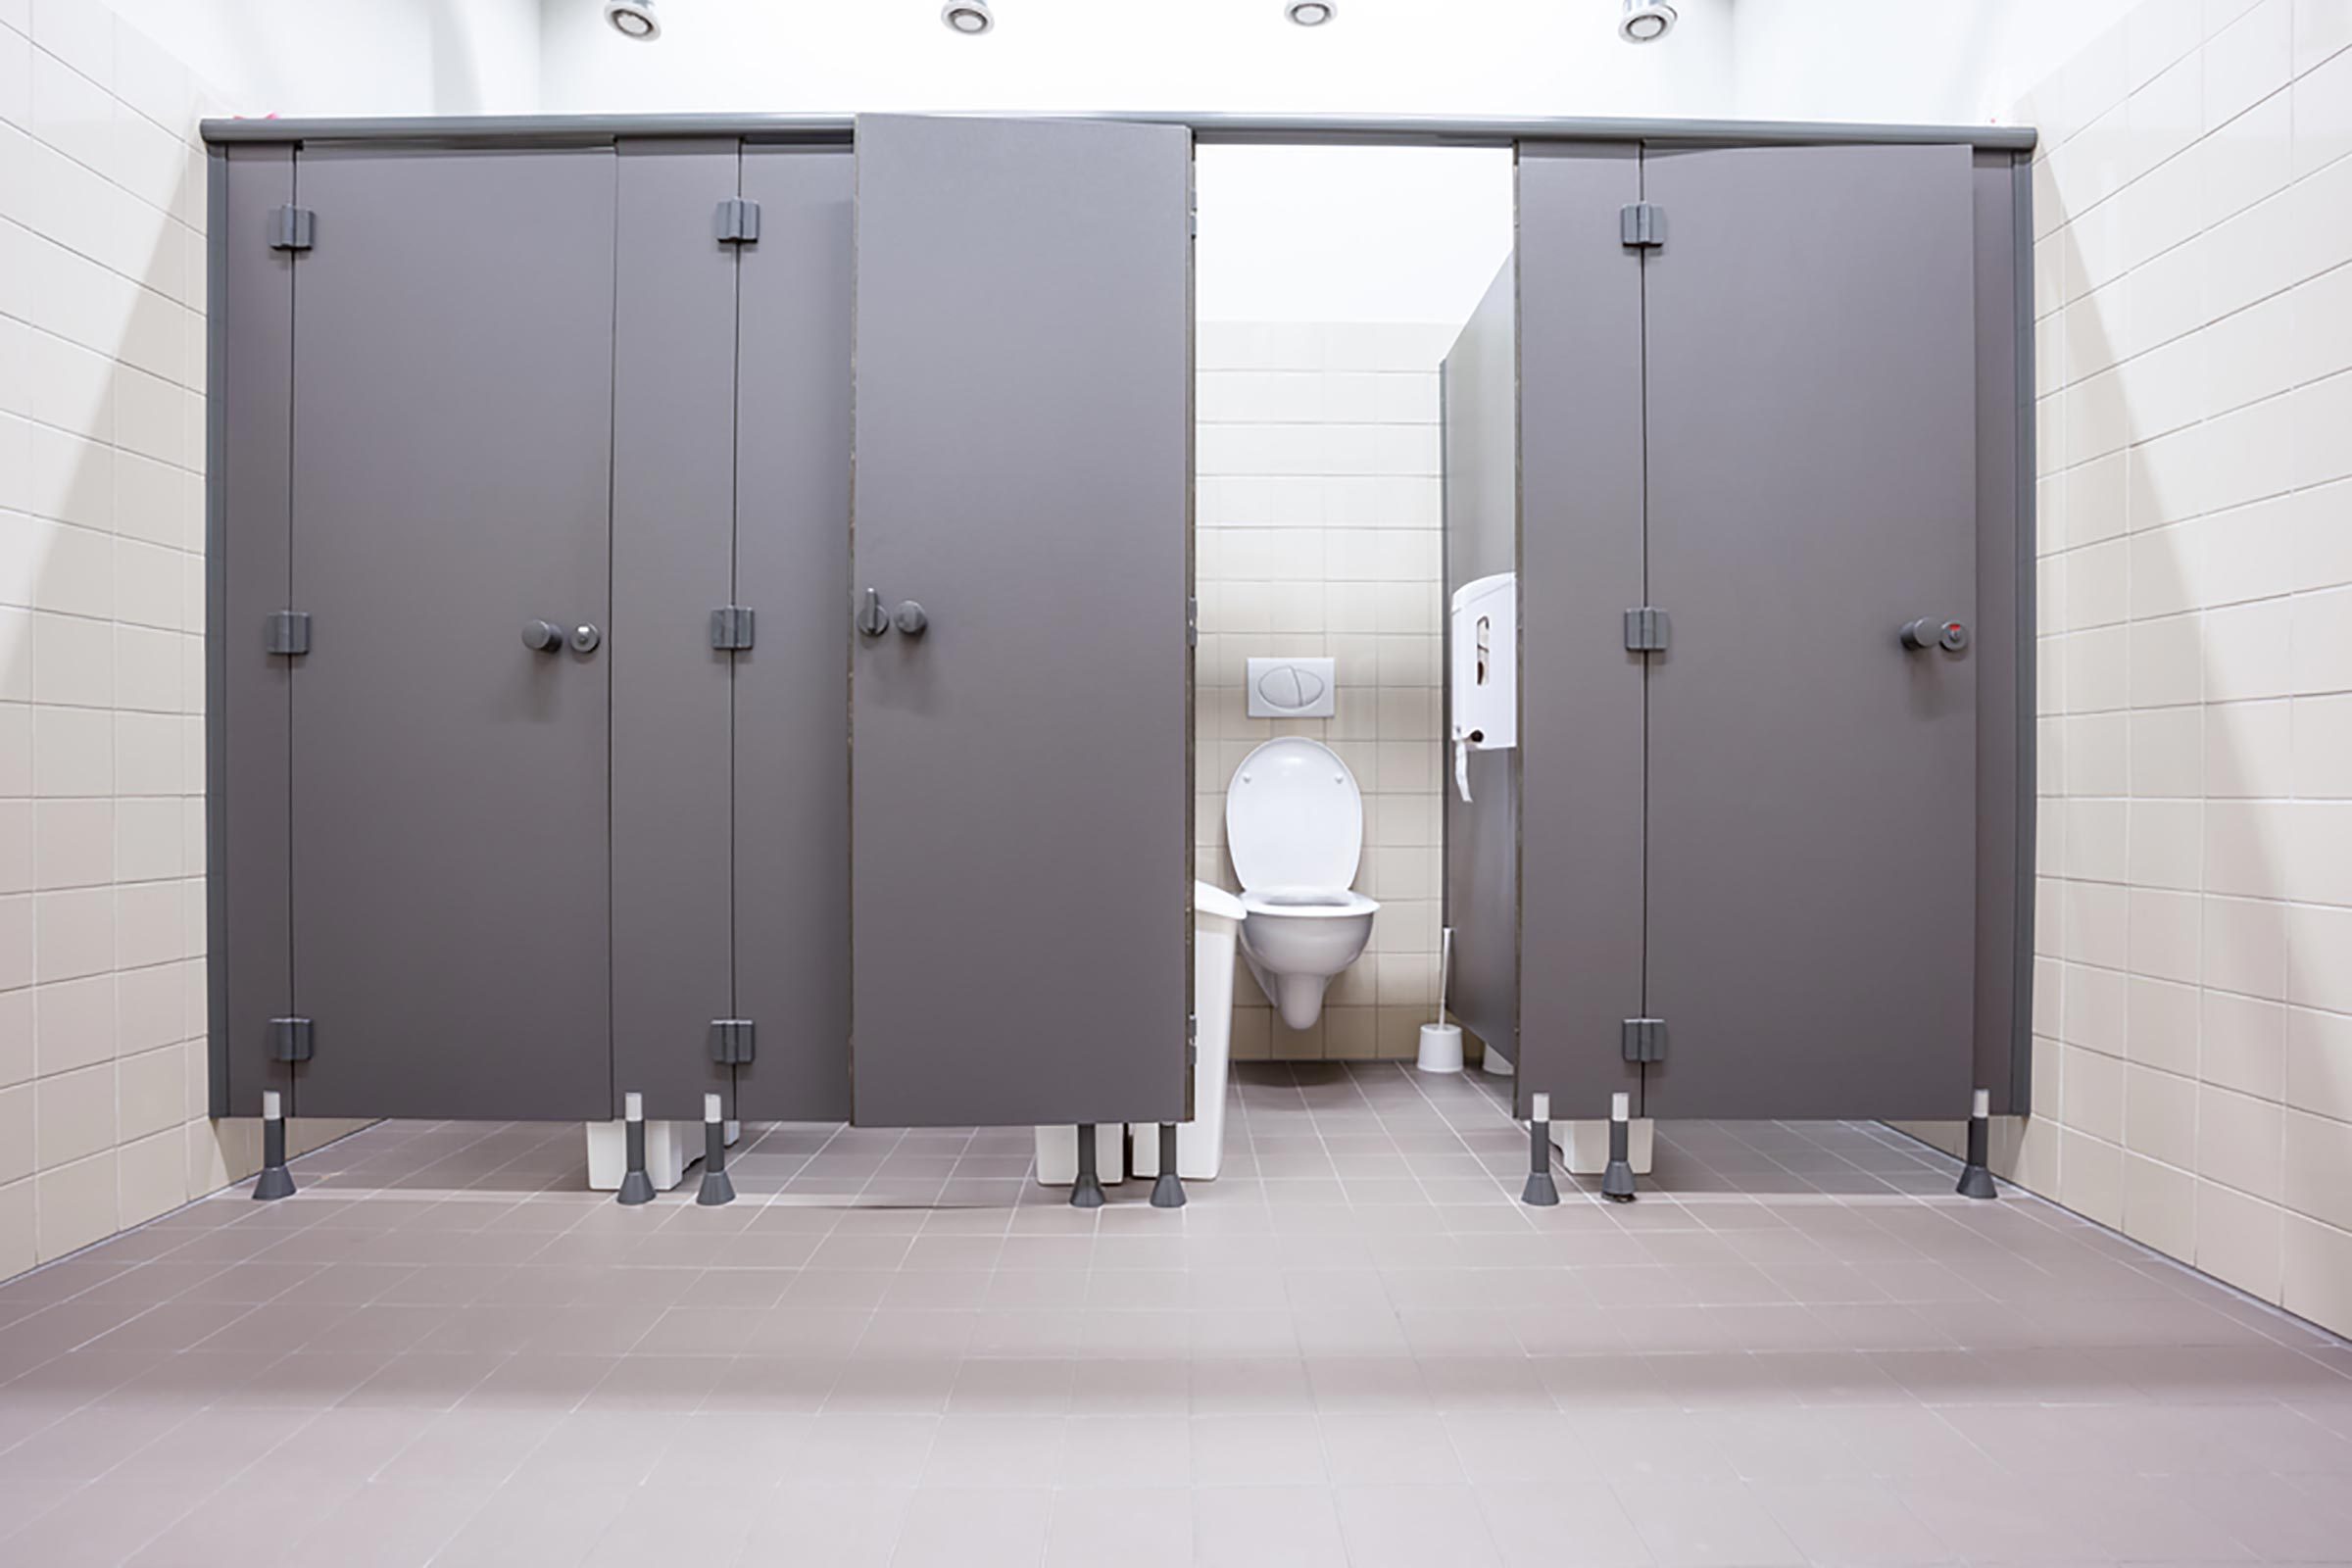 This Is the Only Stall You Should Use in a Public Bathroom